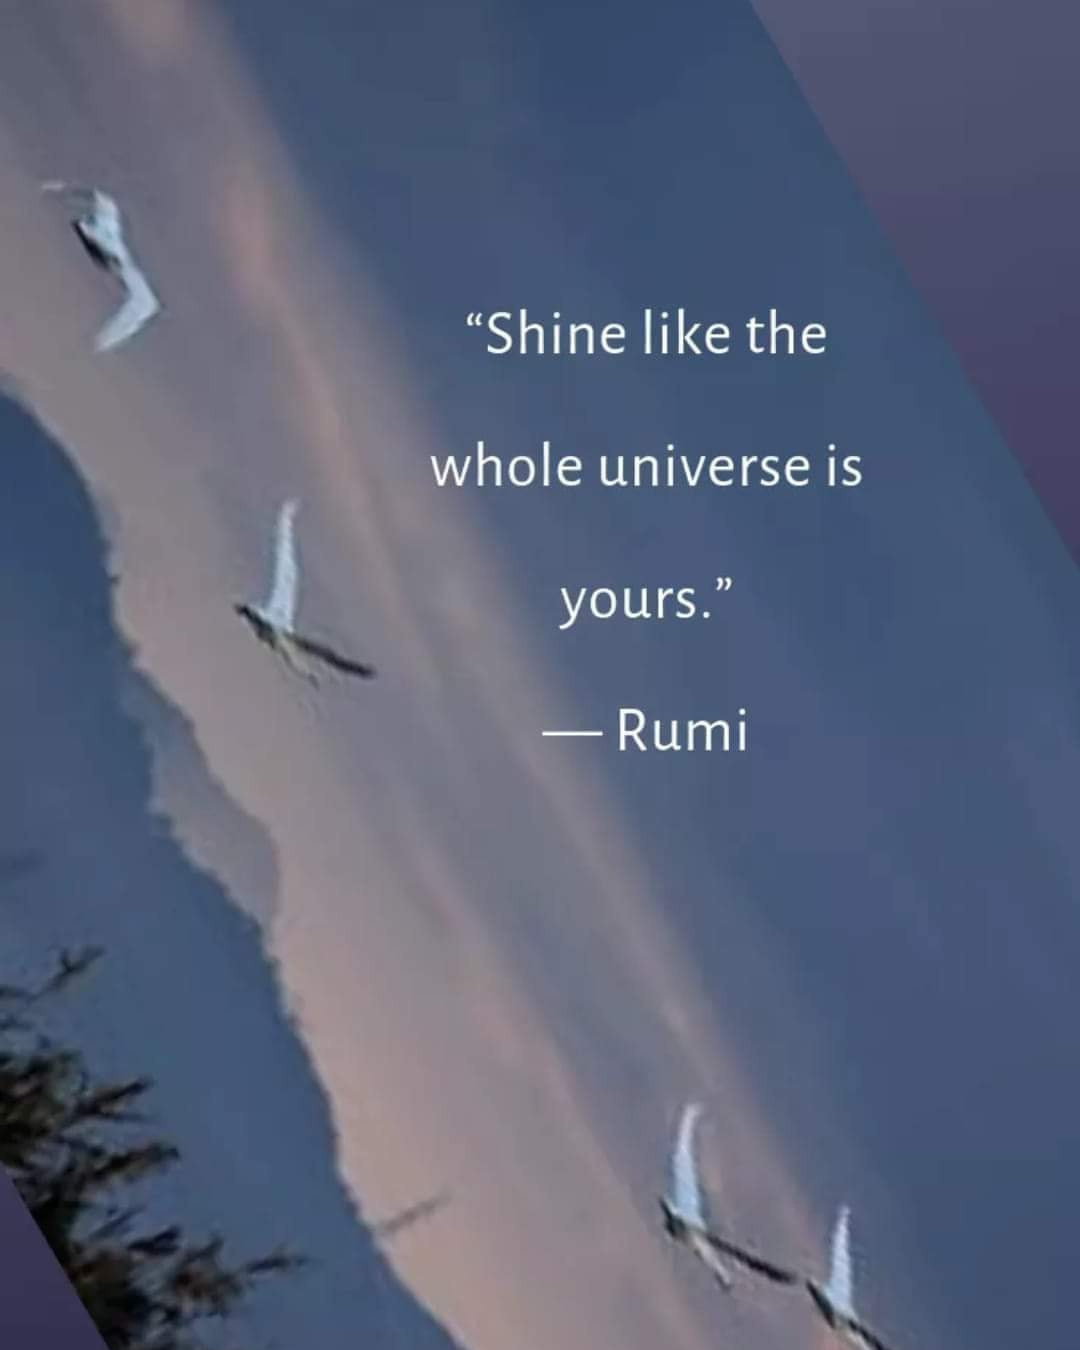 Shine like the whole universe is yours.